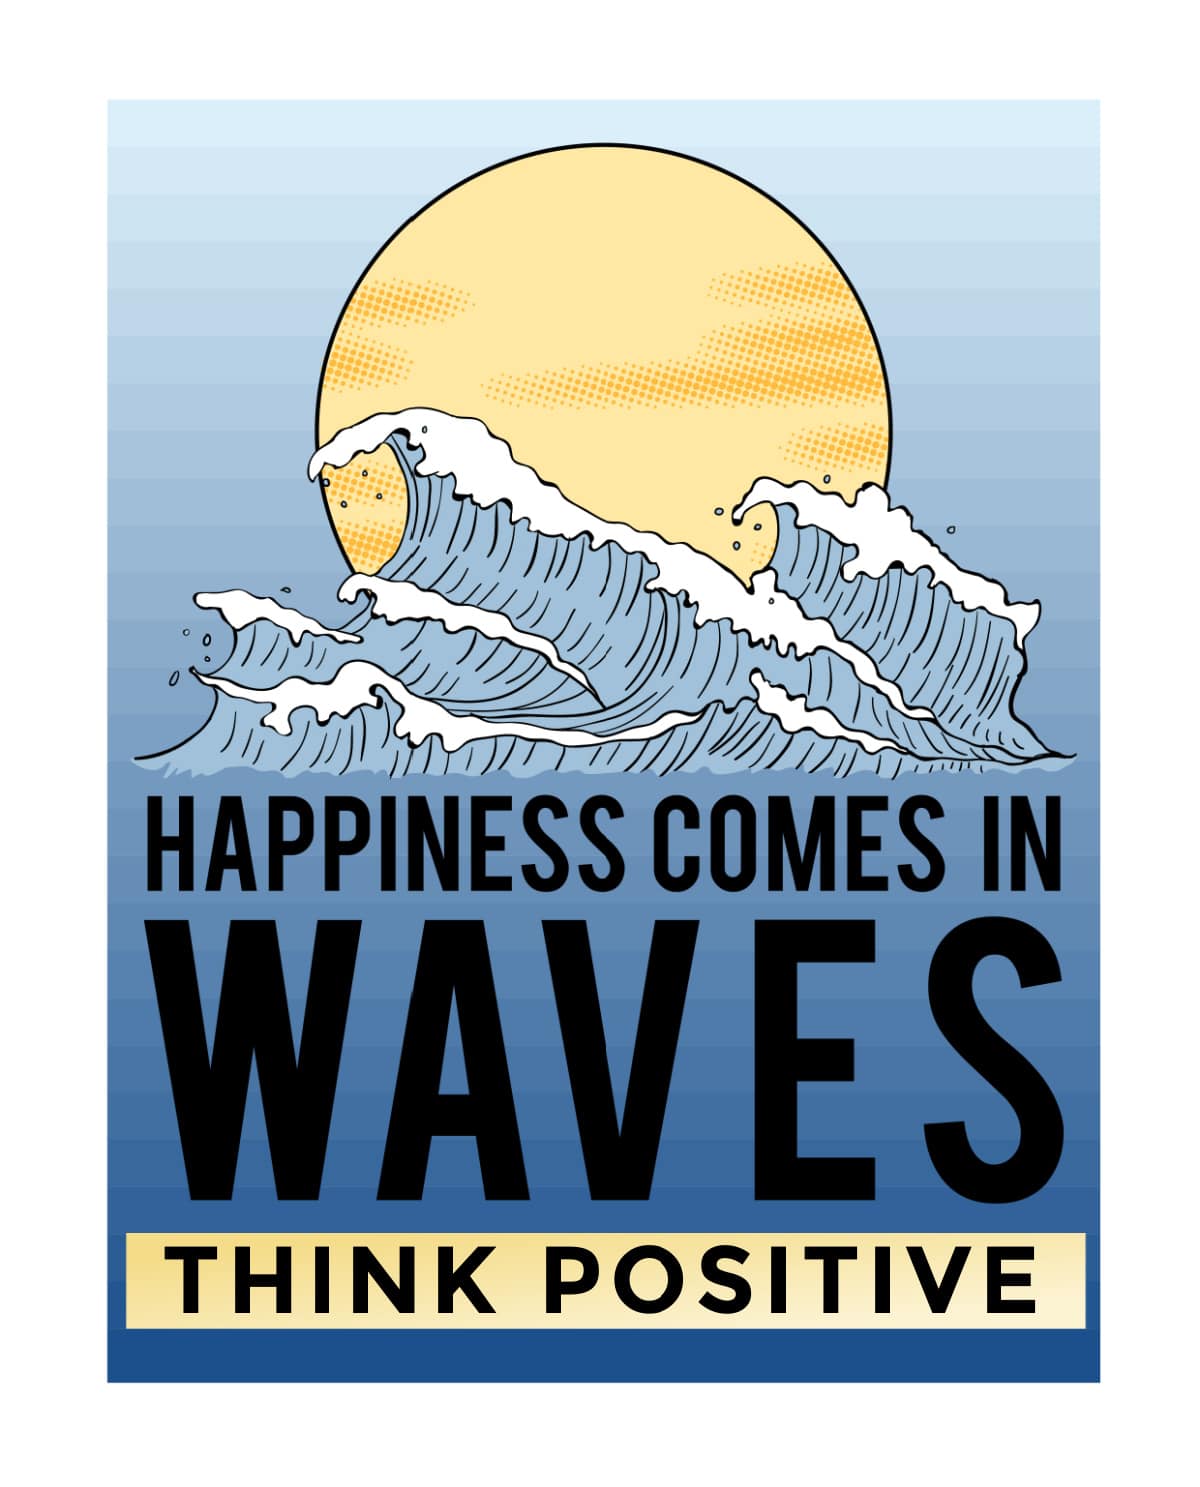 Inspirational poster of ocean waves symbolizing happy and positive thinking